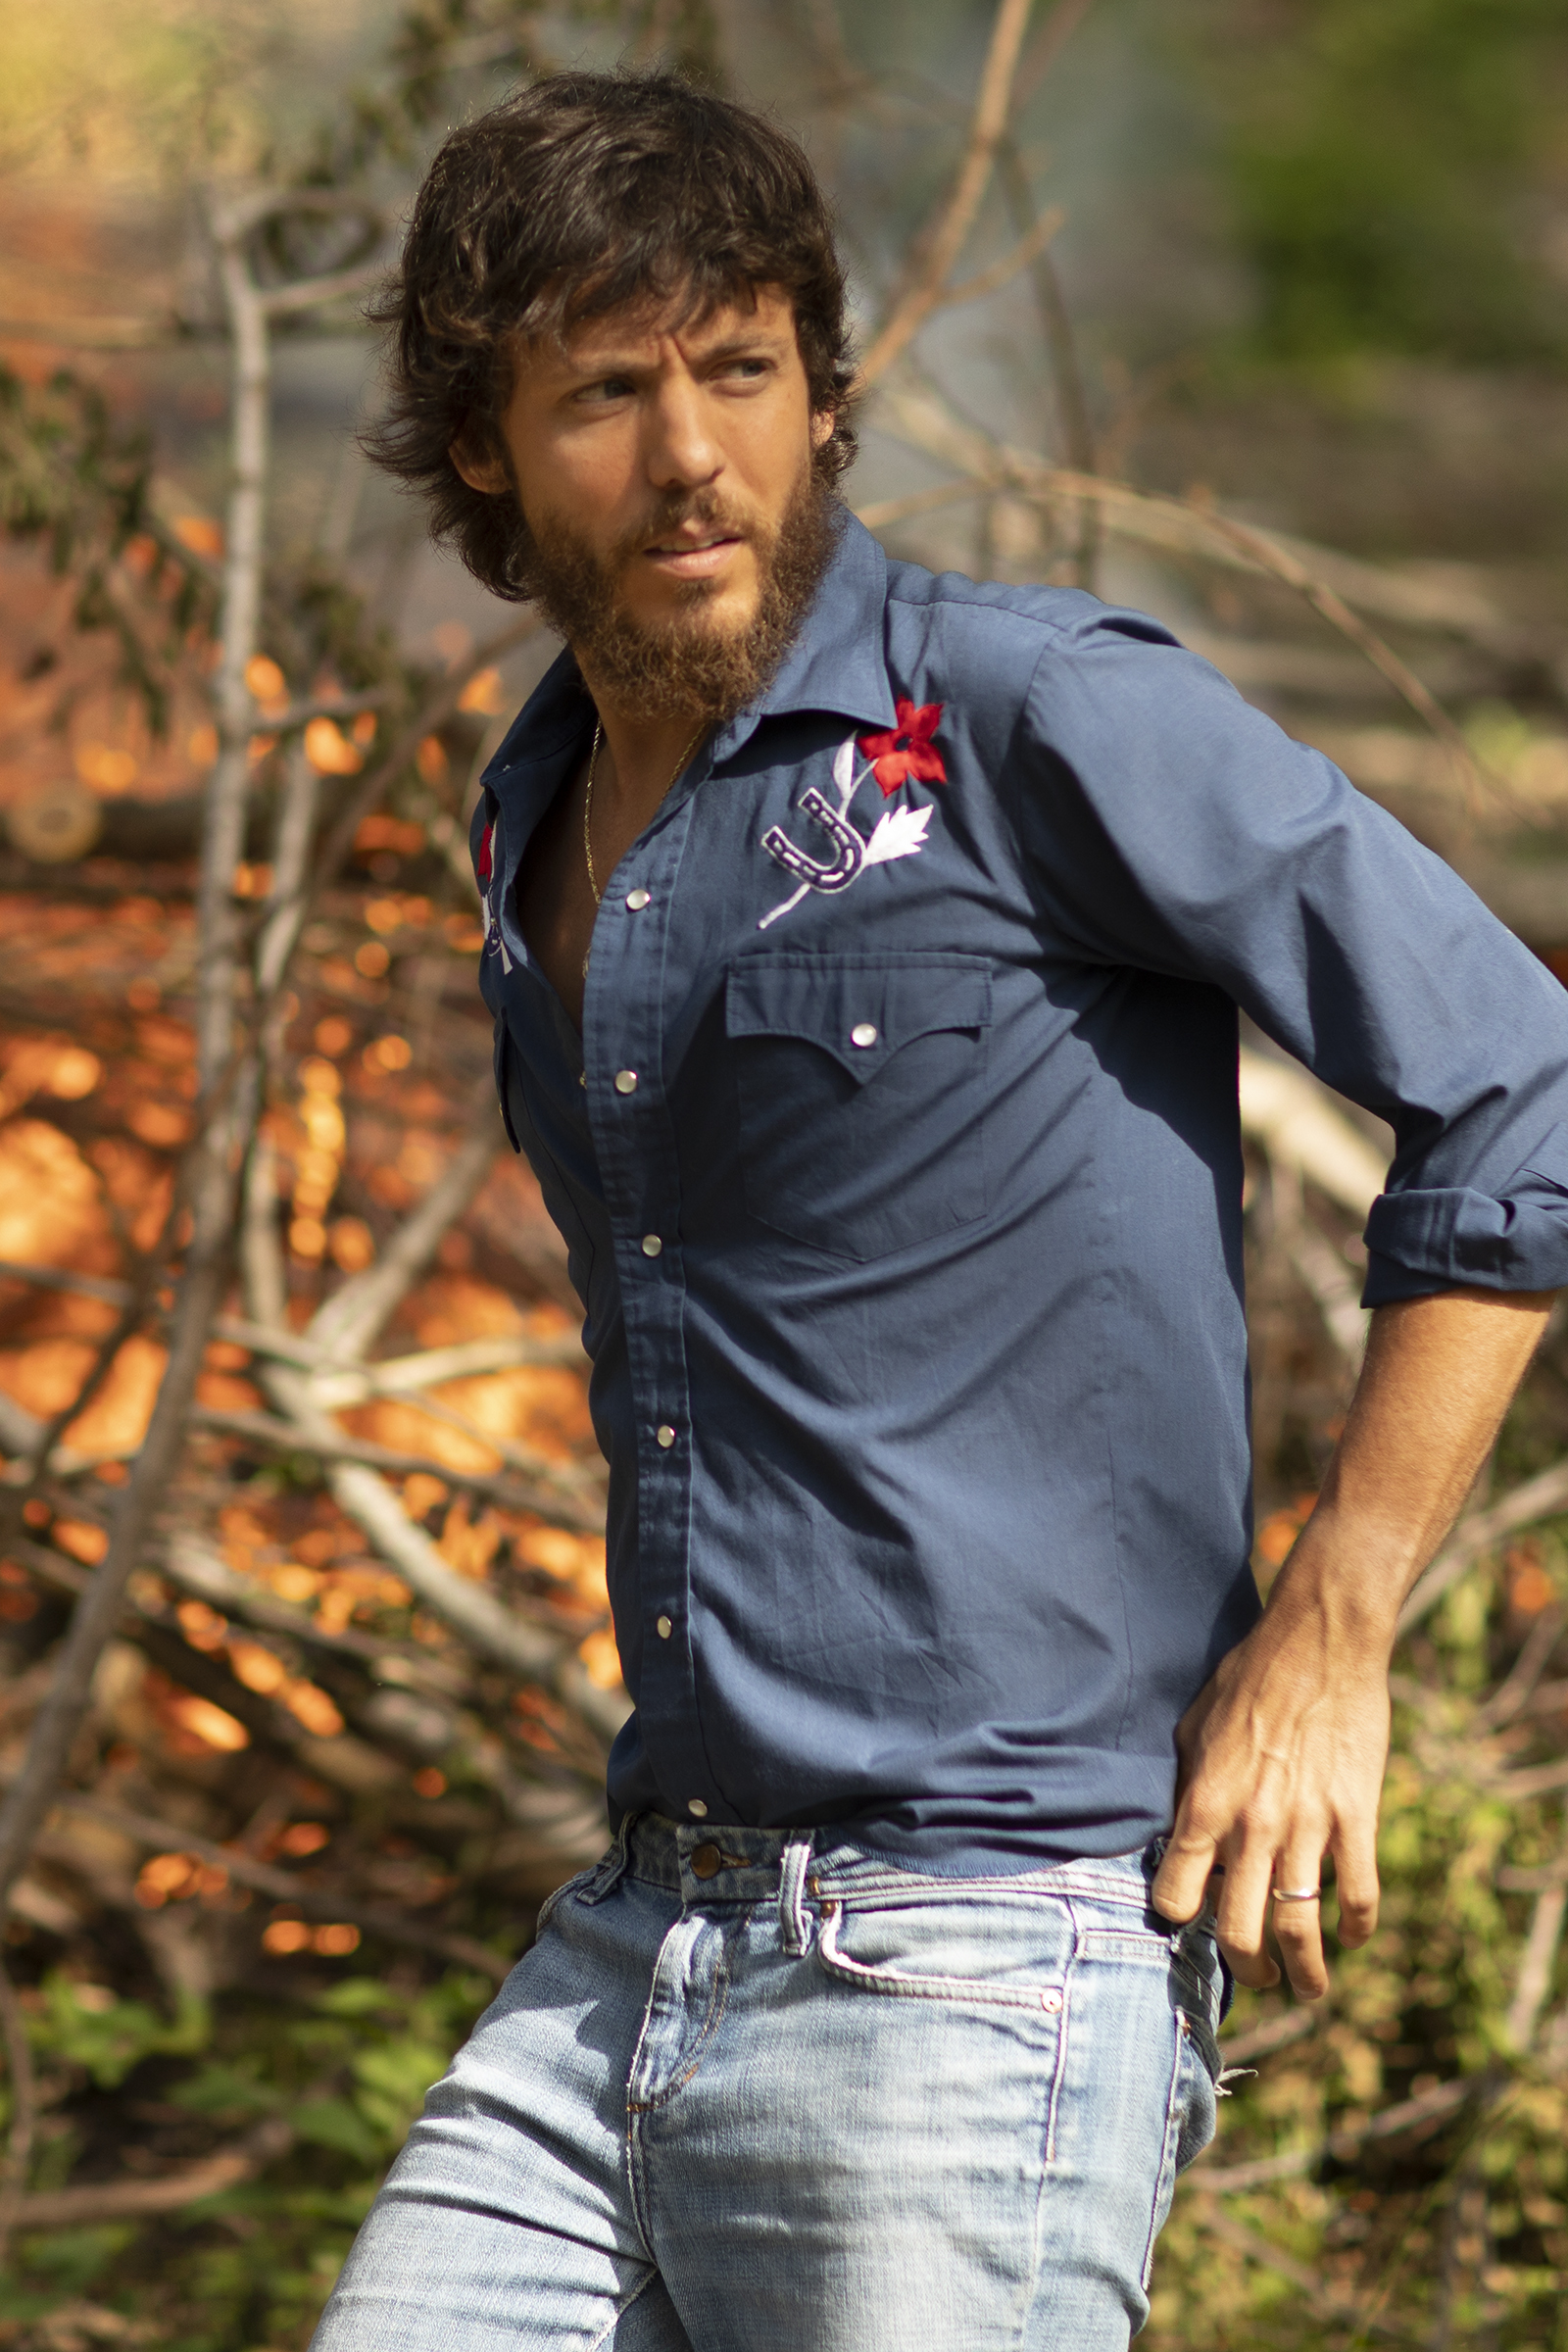 CHRIS JANSON TO CO-HOST COUNTRY COUNTDOWN USA THIS WEEKEND (2/20, 2/21)